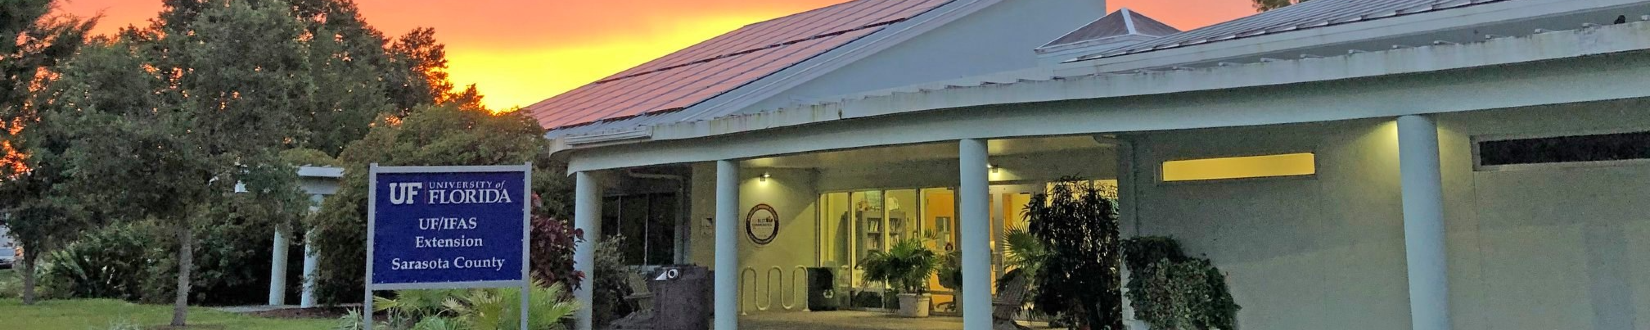 exterior shot of UF/IFAS Extension Sarasota County office at sunset, with orange-red sky in background